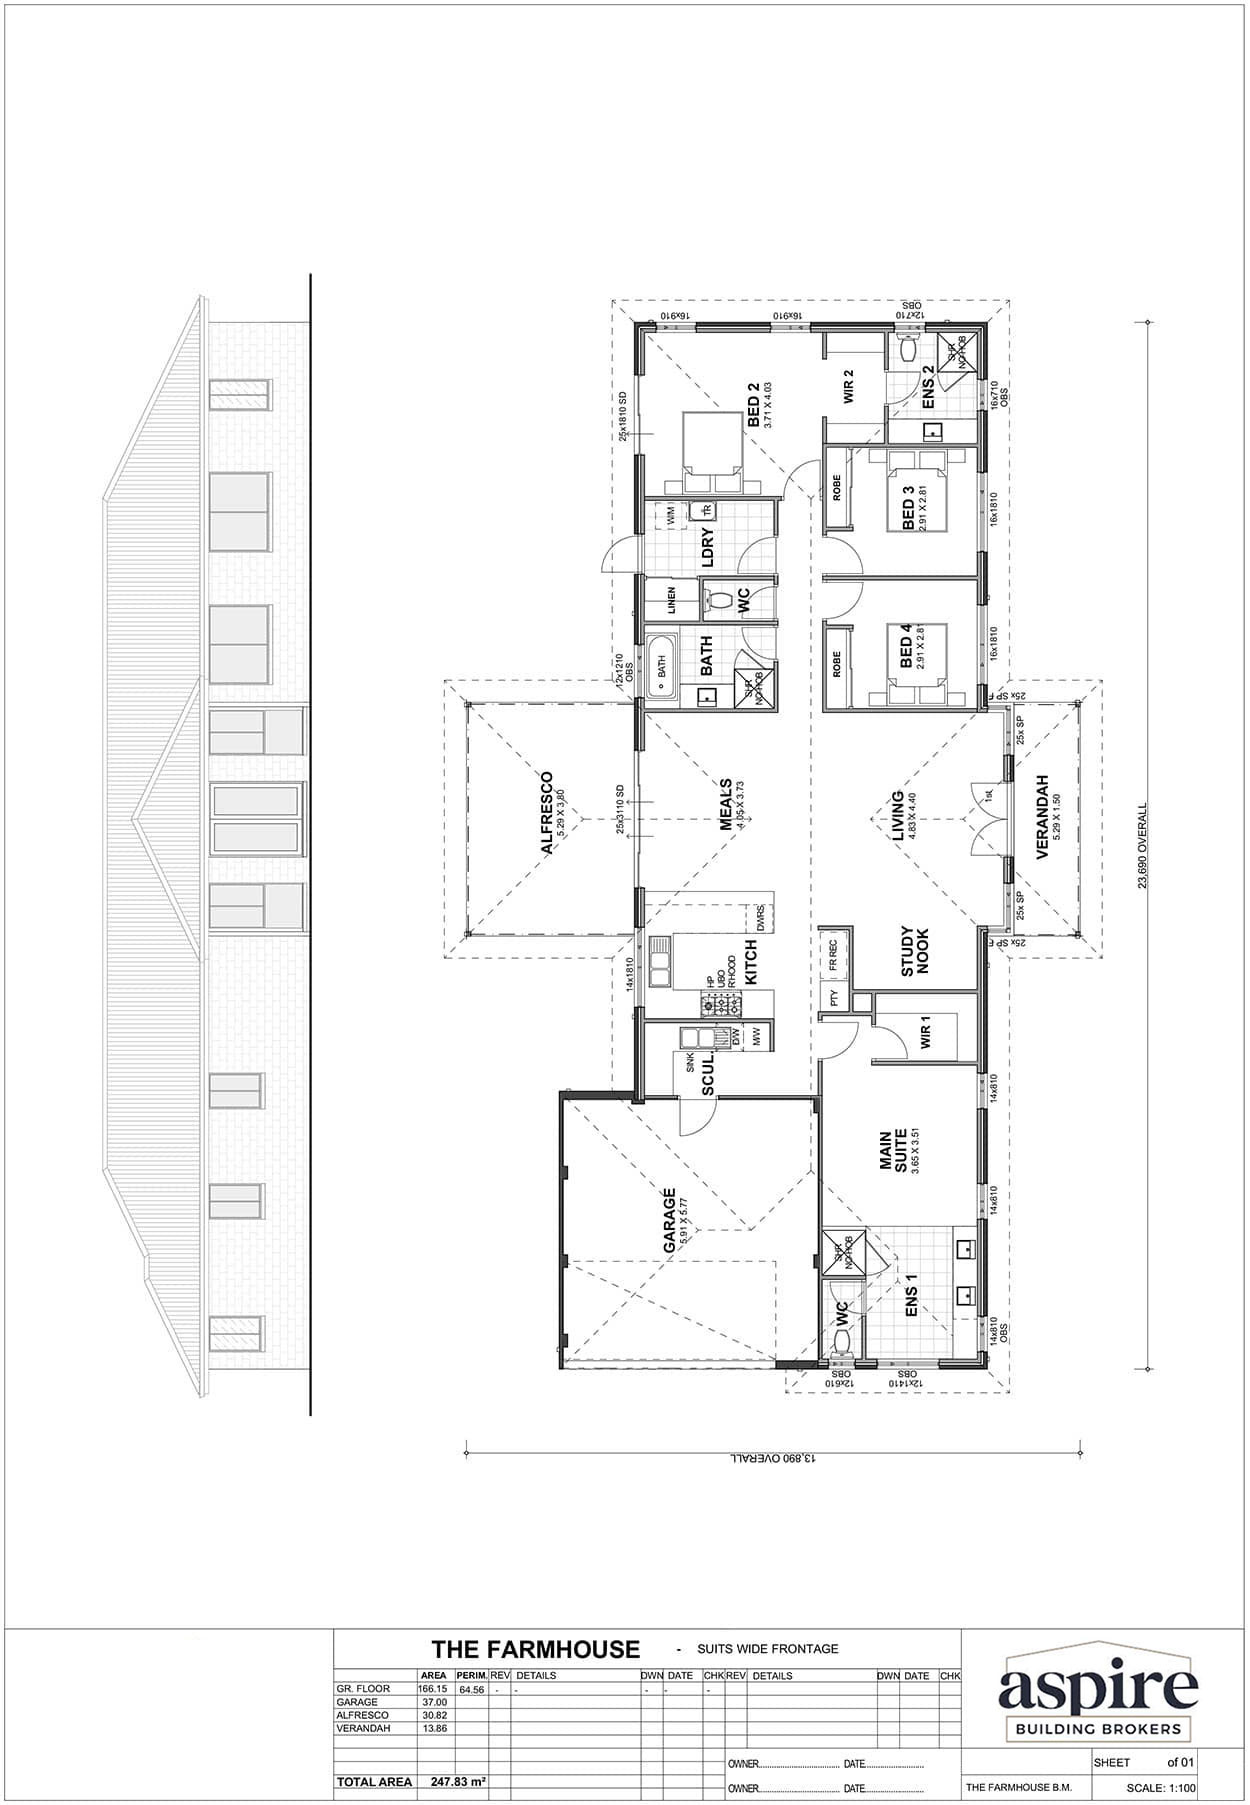 The Farmhouse Floor Plan - Perth New Build Home Designs. 4 Bedrooms, suited for Wide Frontage. Aspire Building Brokers